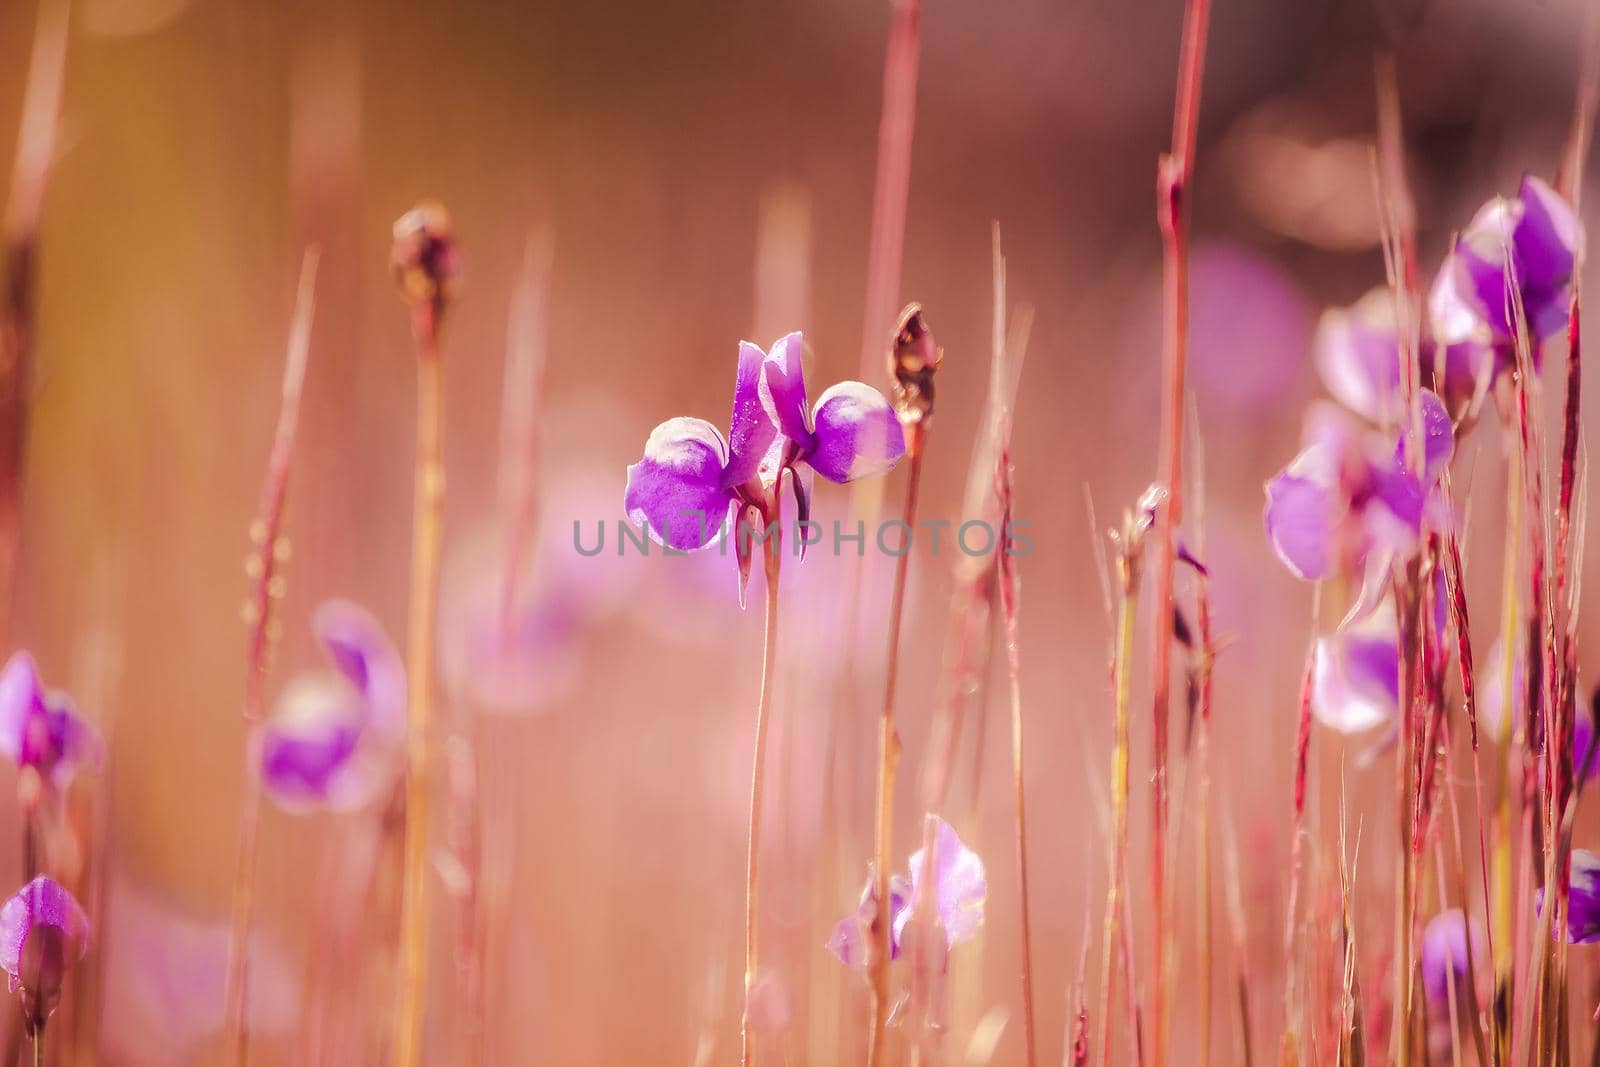 Utricularia delphinioides The flowers are dark purple bouquets. by Puripatt